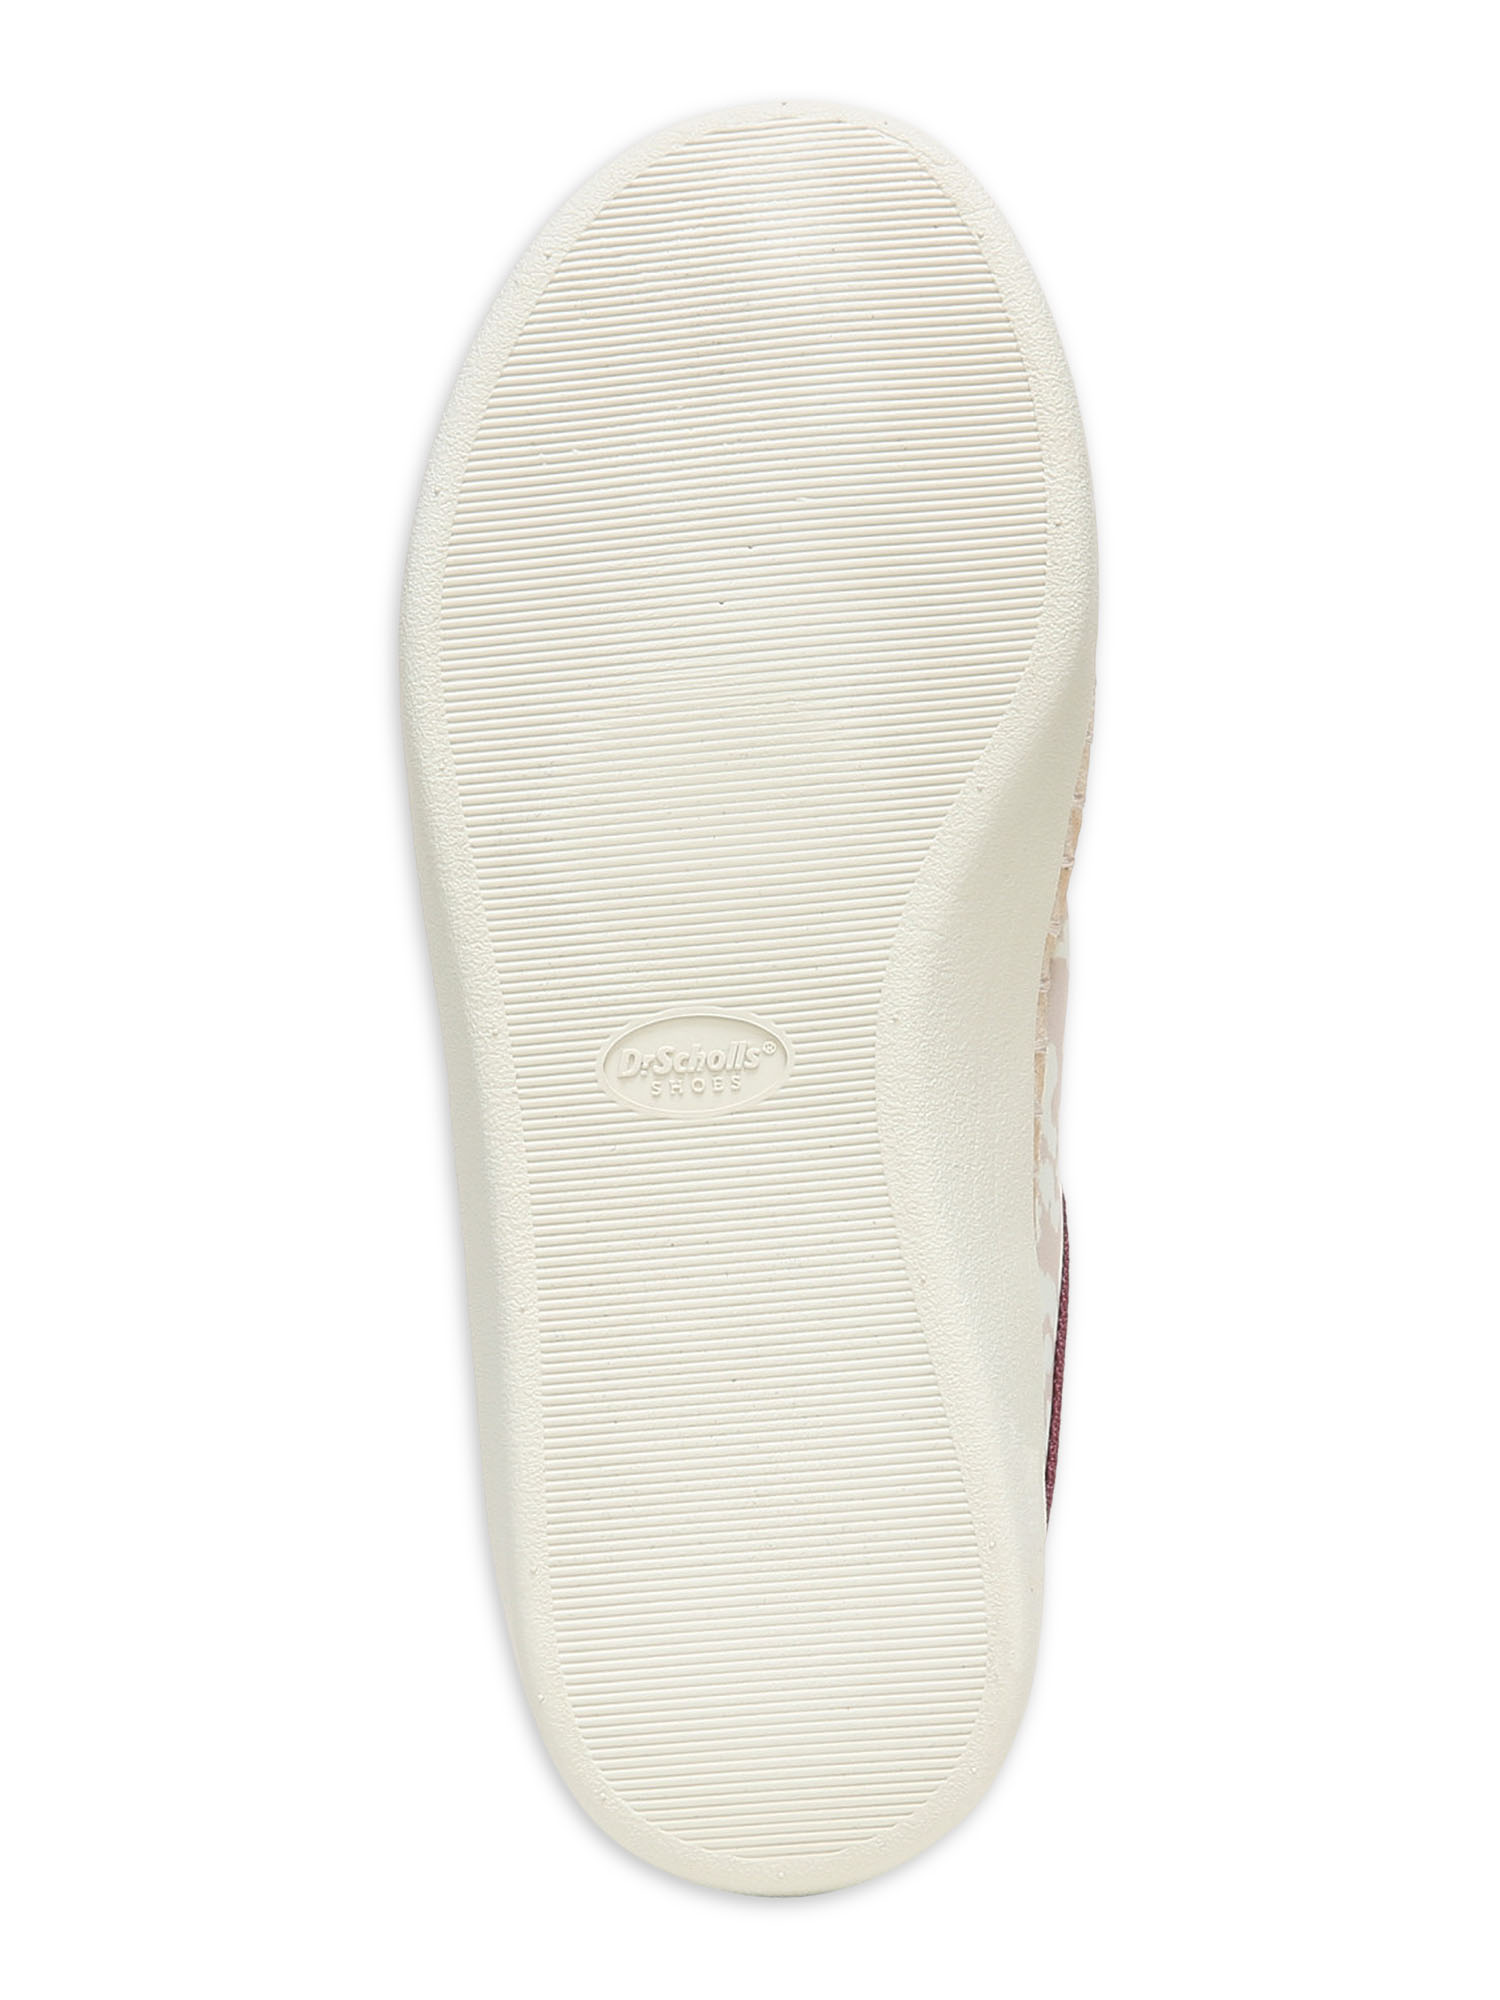 Dr. Scholl's Women's Cozy Vibes Quilted Slipper - image 2 of 6